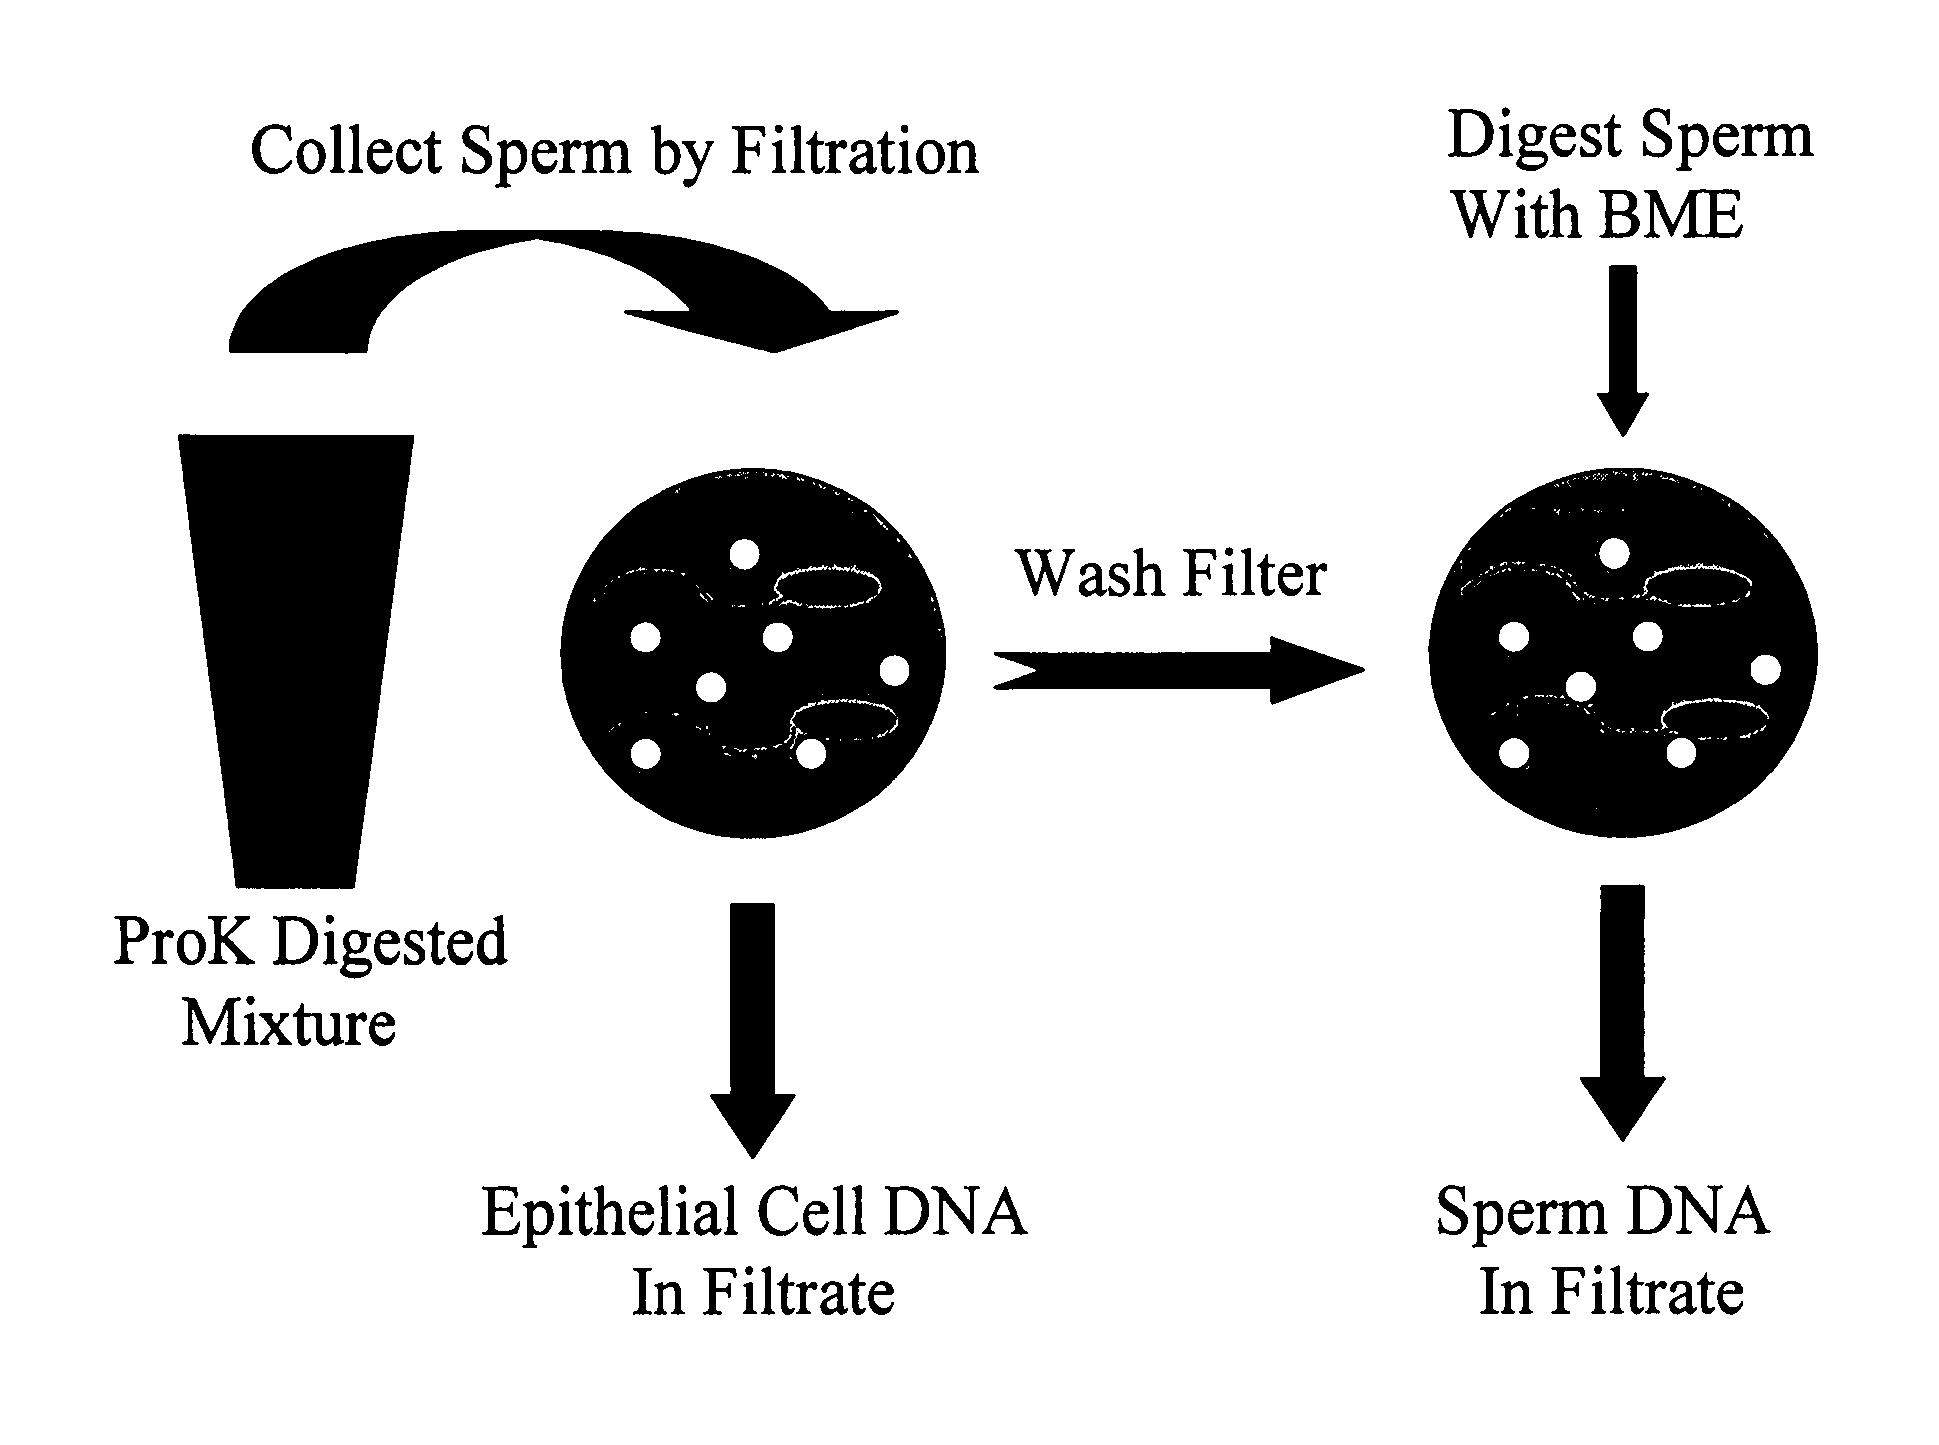 Method for processing samples containing sperm and non-sperm cells for subsequent analysis of the sperm DNA